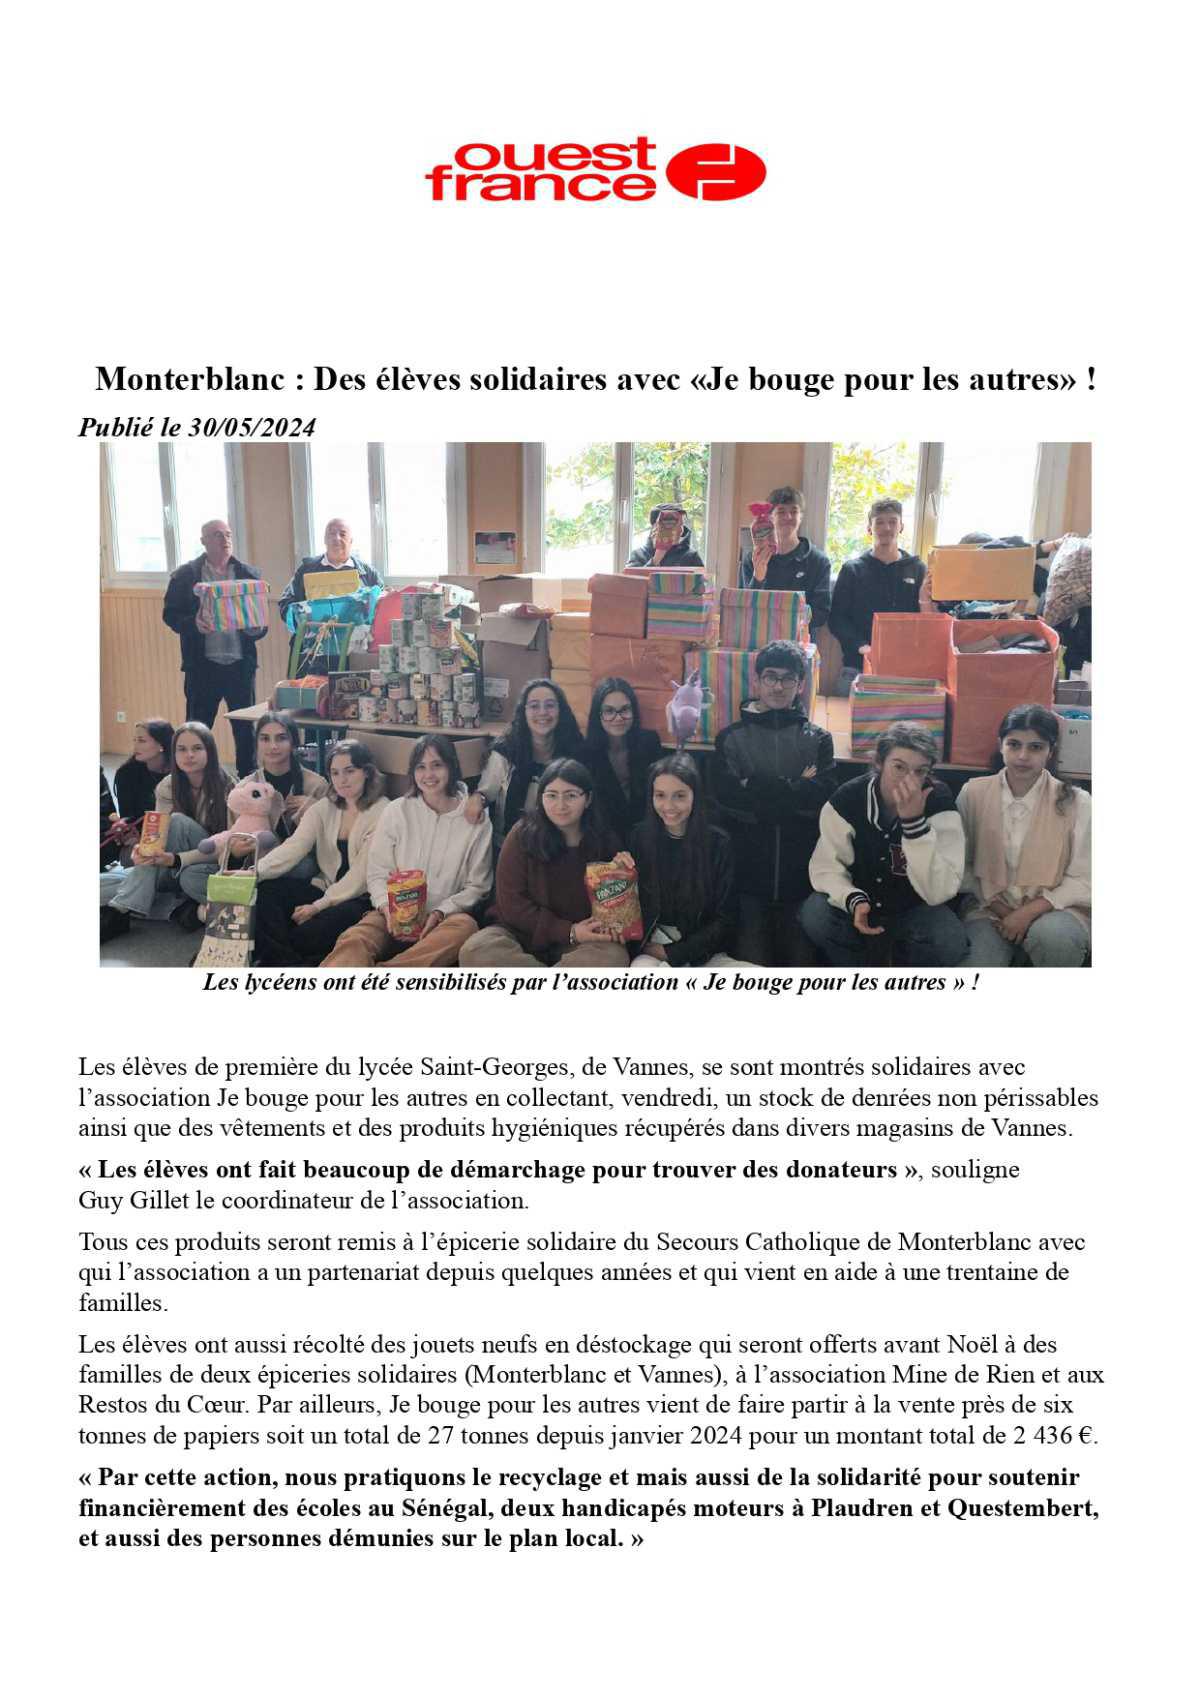 [ST-GEORGES] Action solidaire 